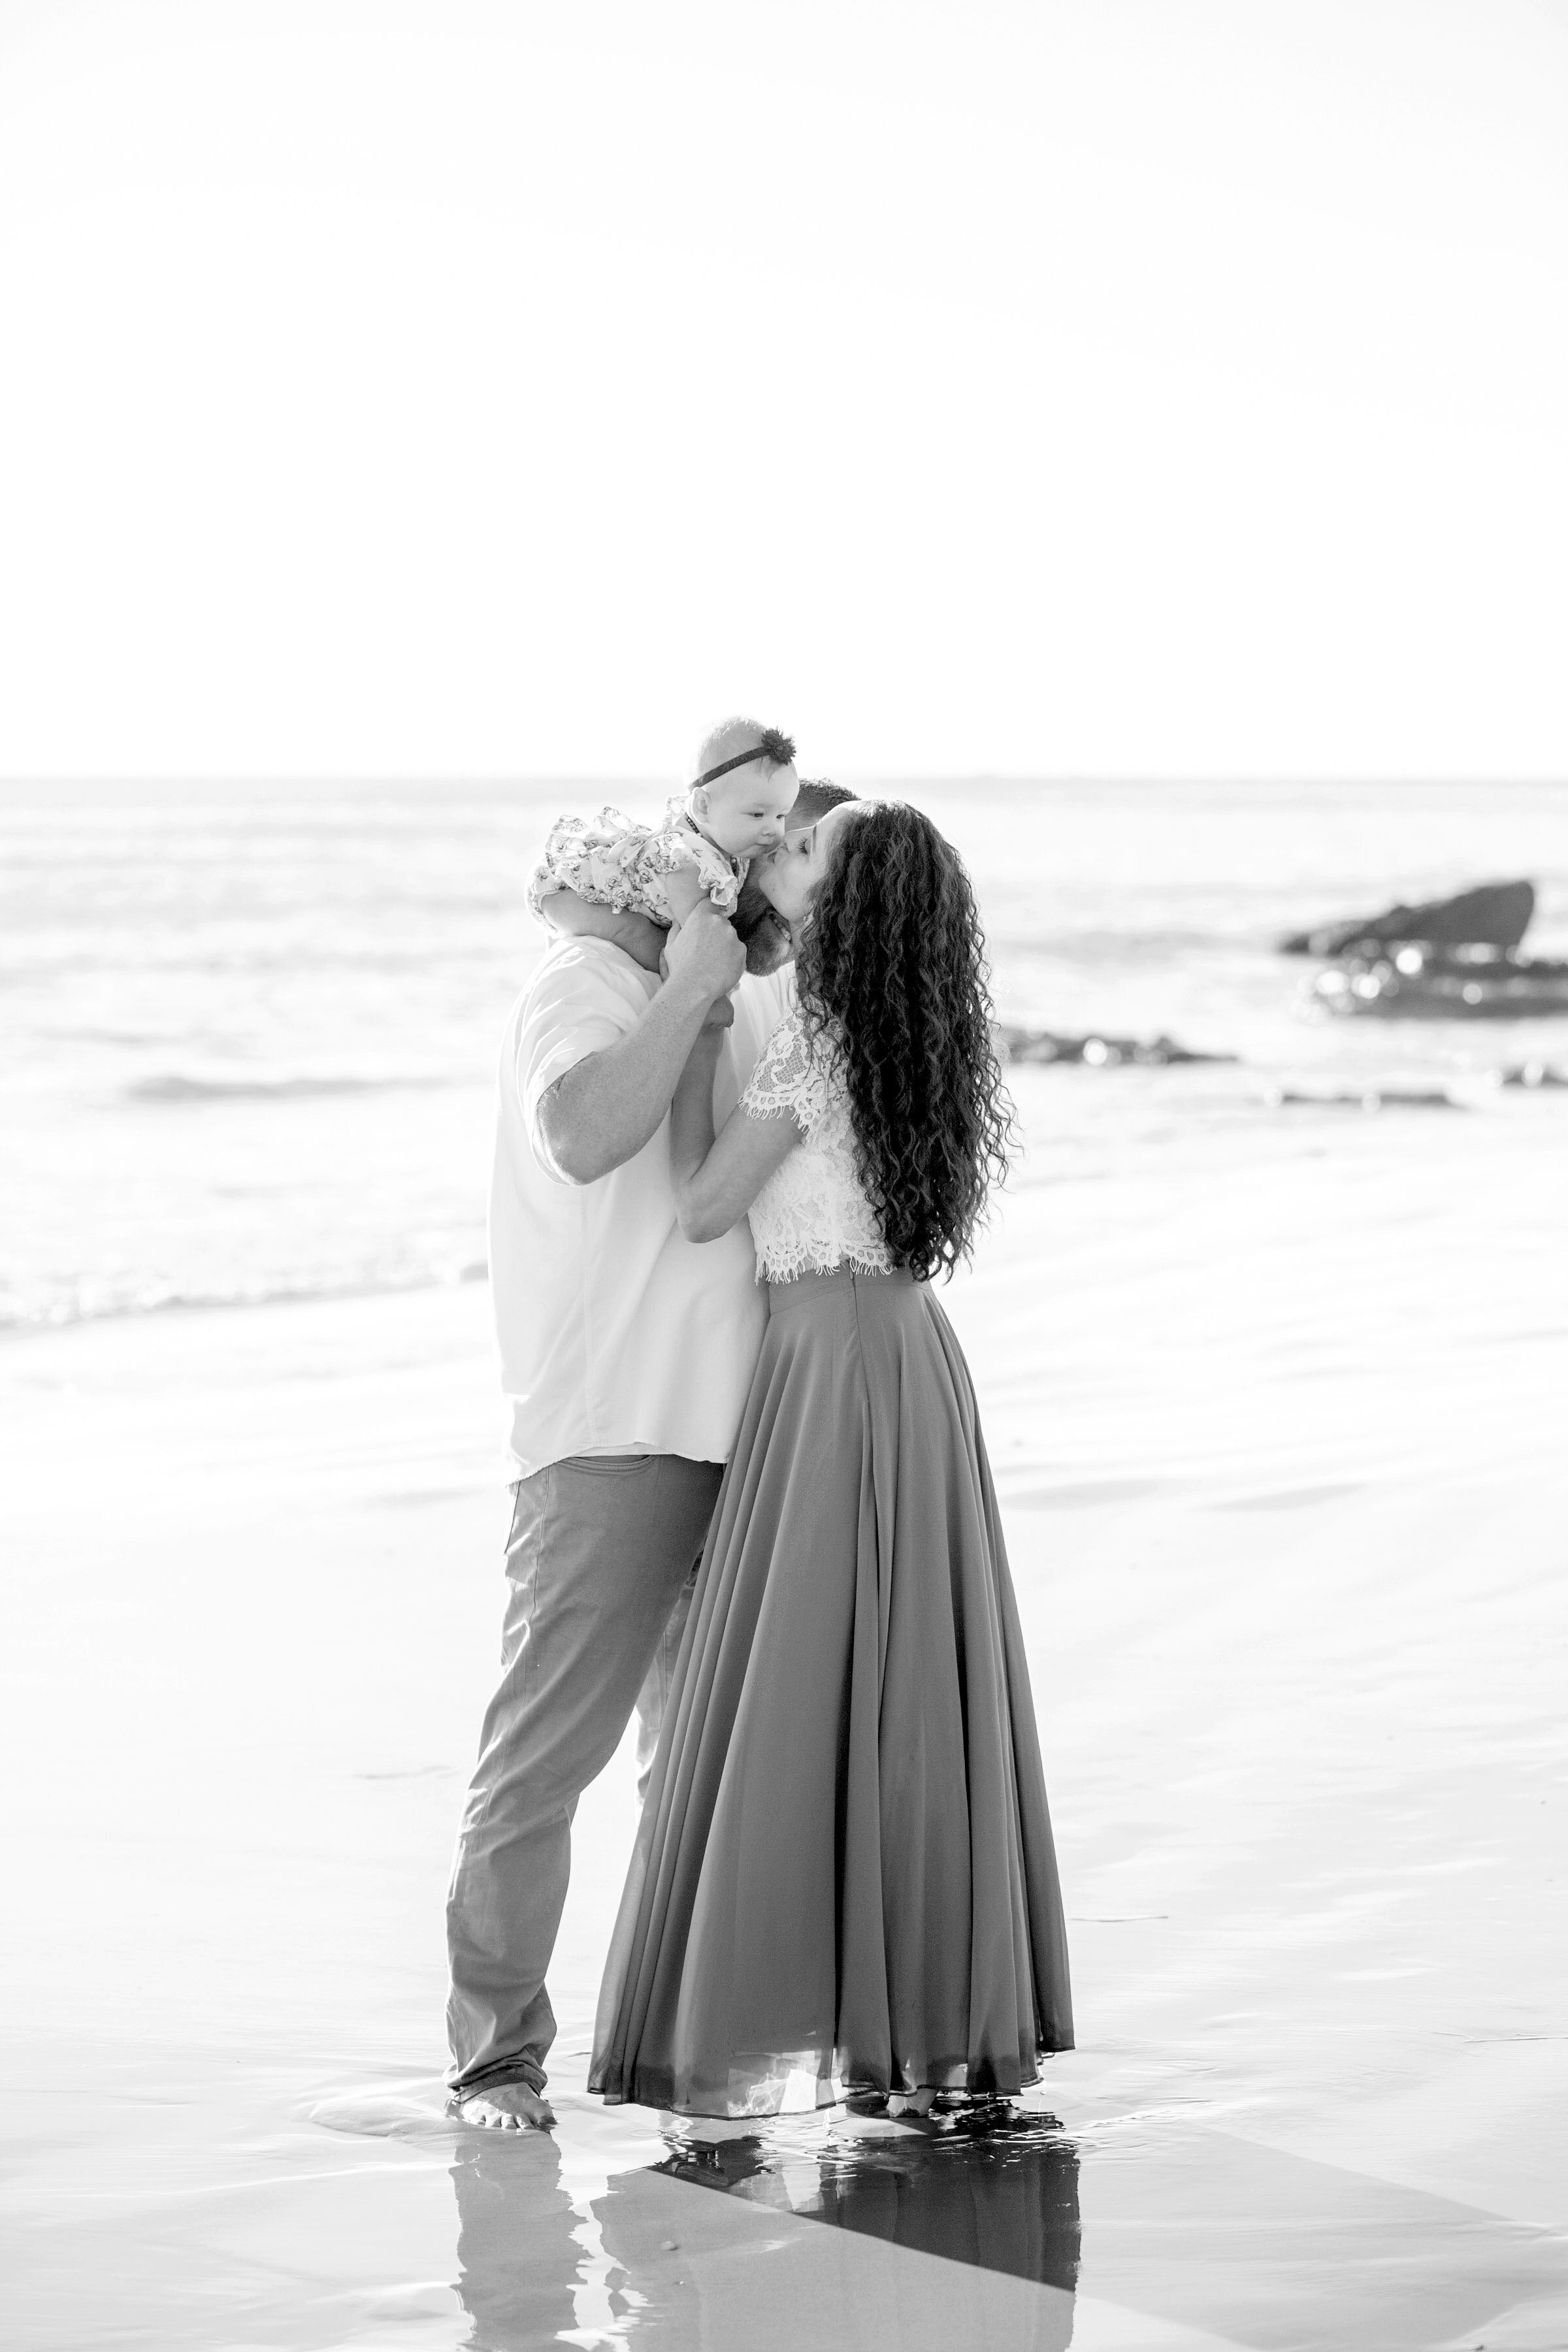 CRYSTAL-COVE-STATE-PARK-FAMILY-PHOTOS-BROOKE-TOBIN-PHOTOGRAPHY_09.jpg